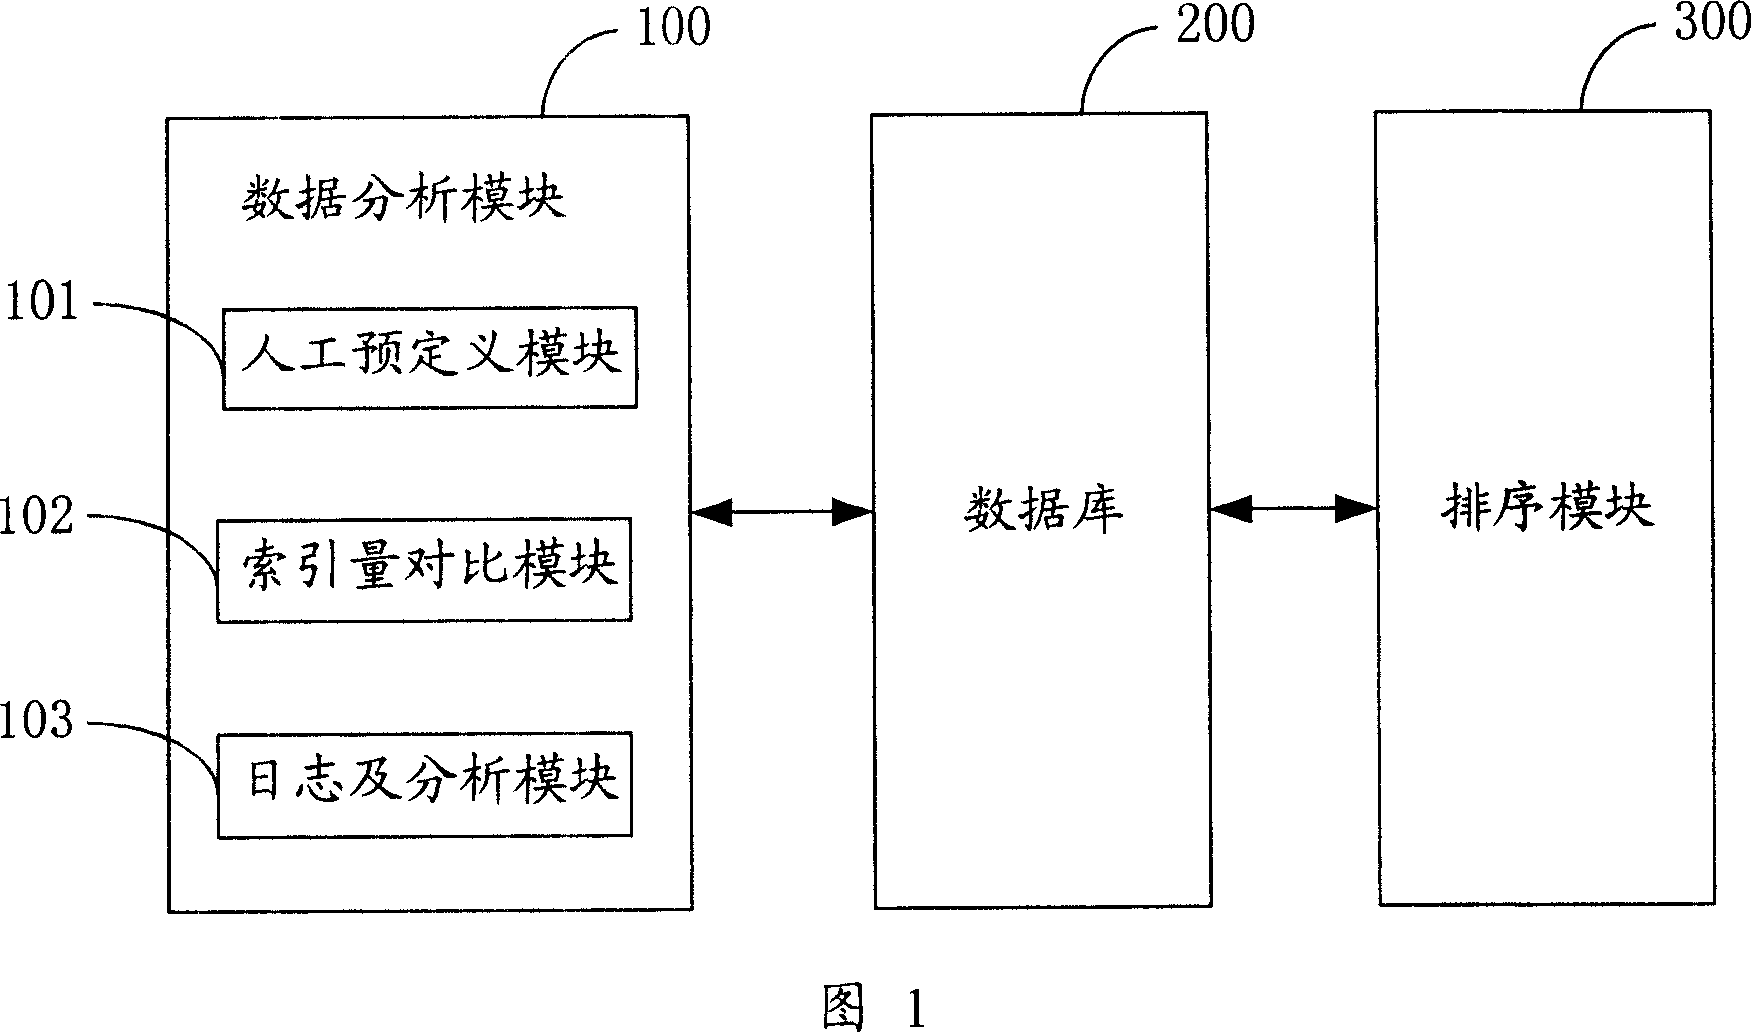 Integrative searching result sequencing system and method